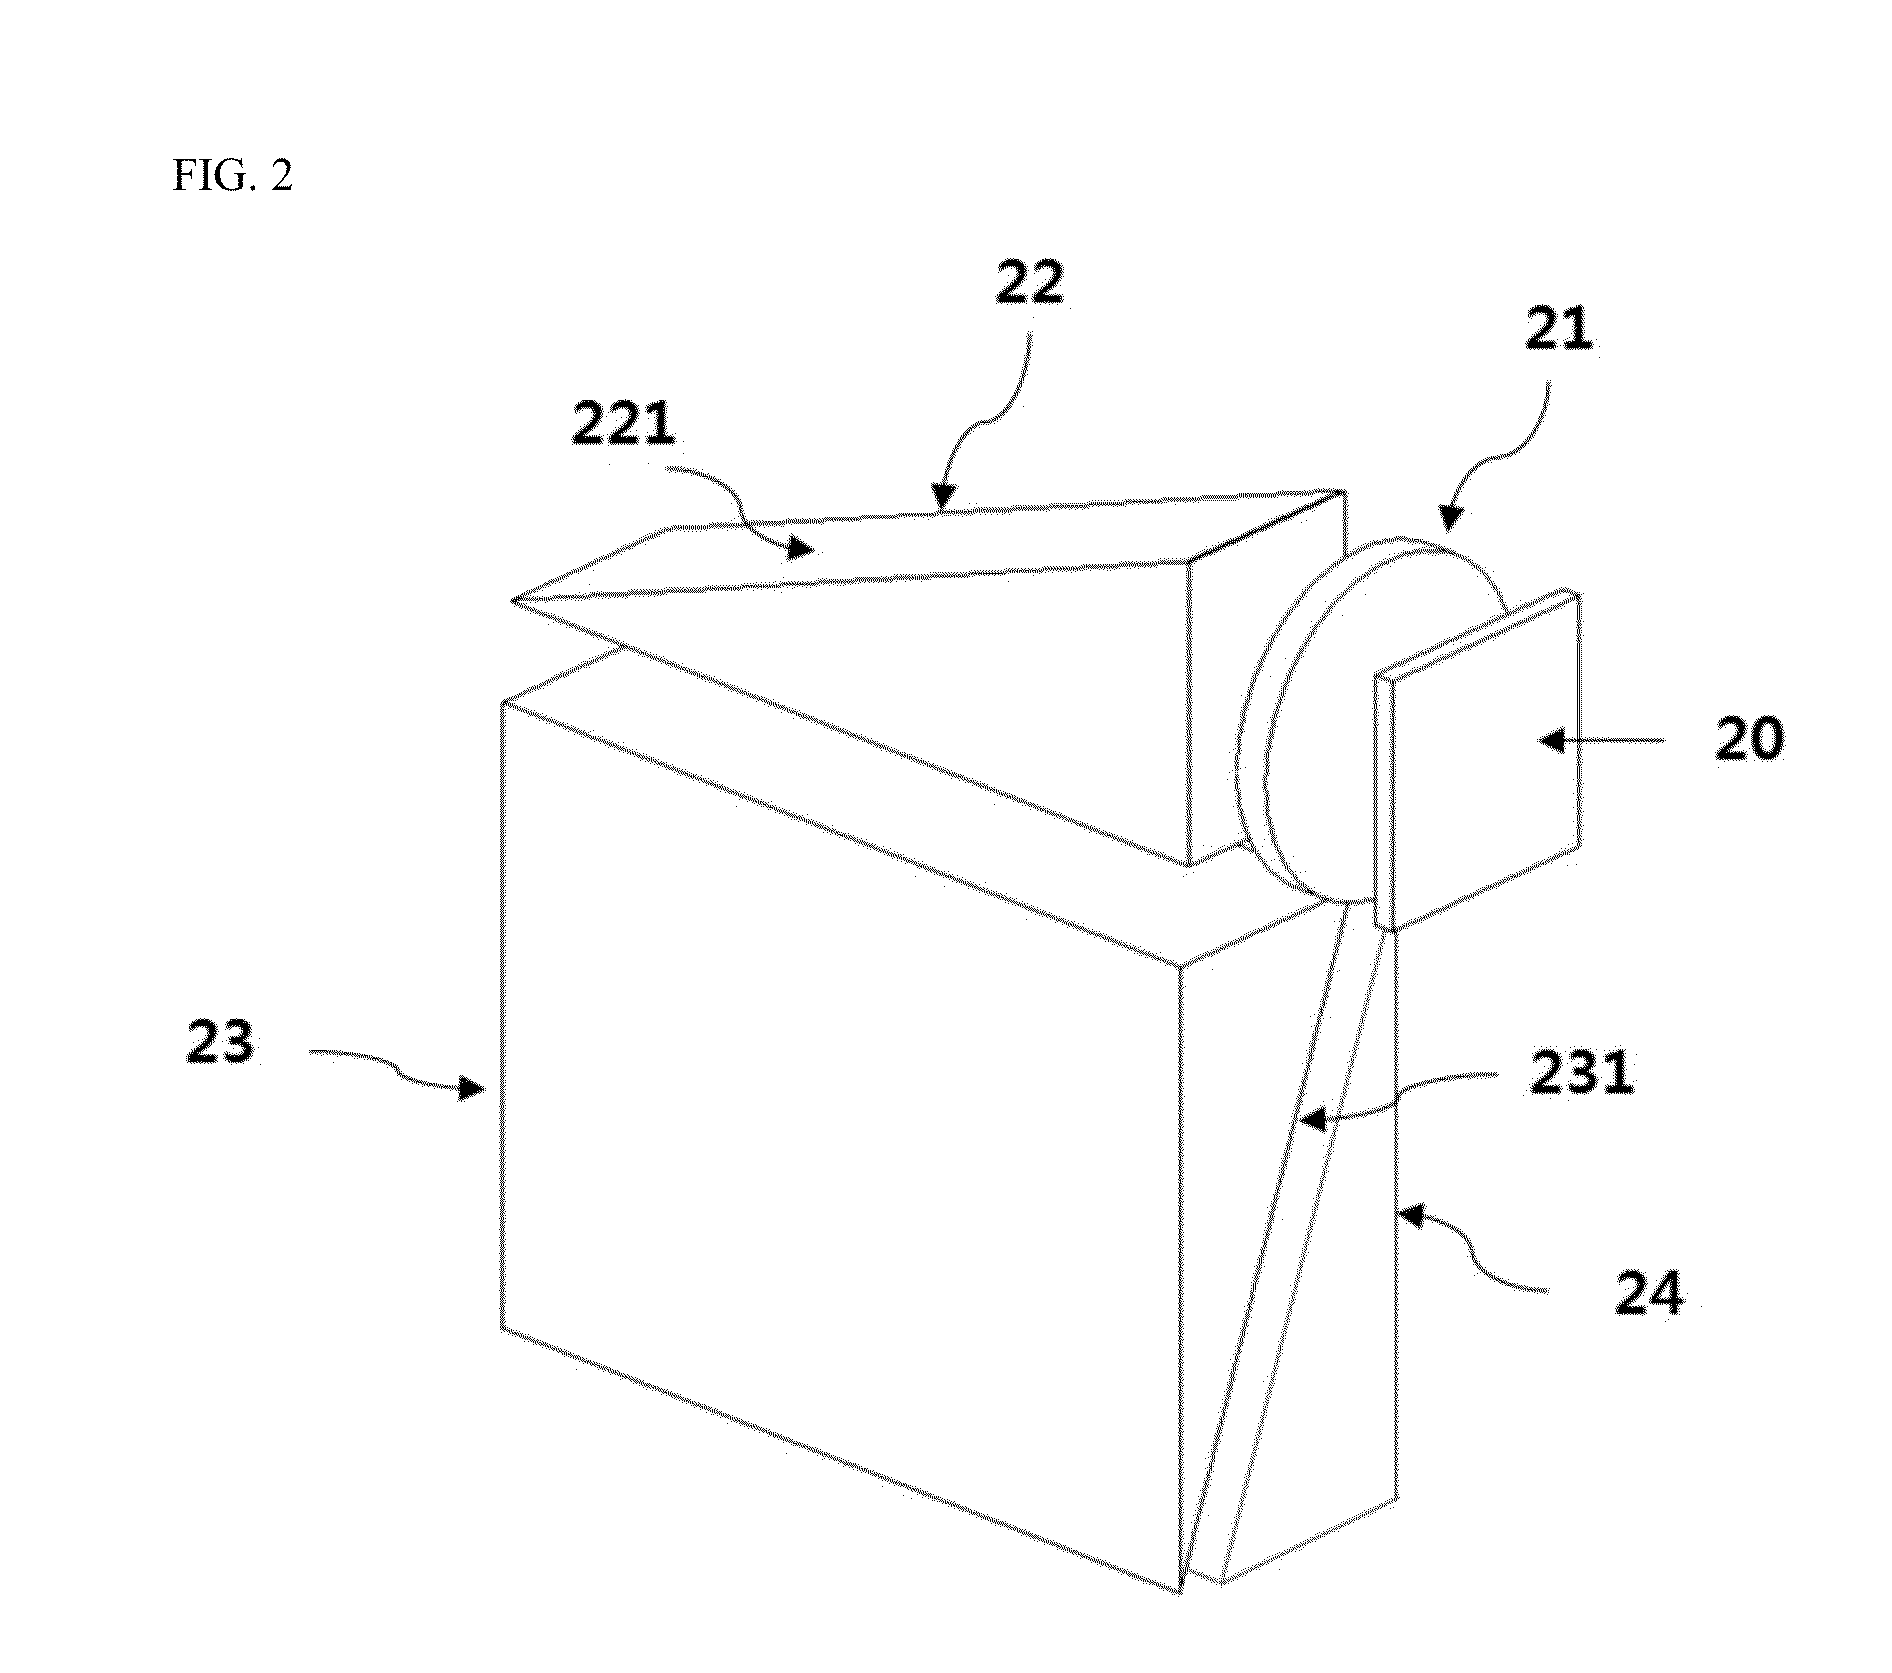 Optical system for see-through head mounted display